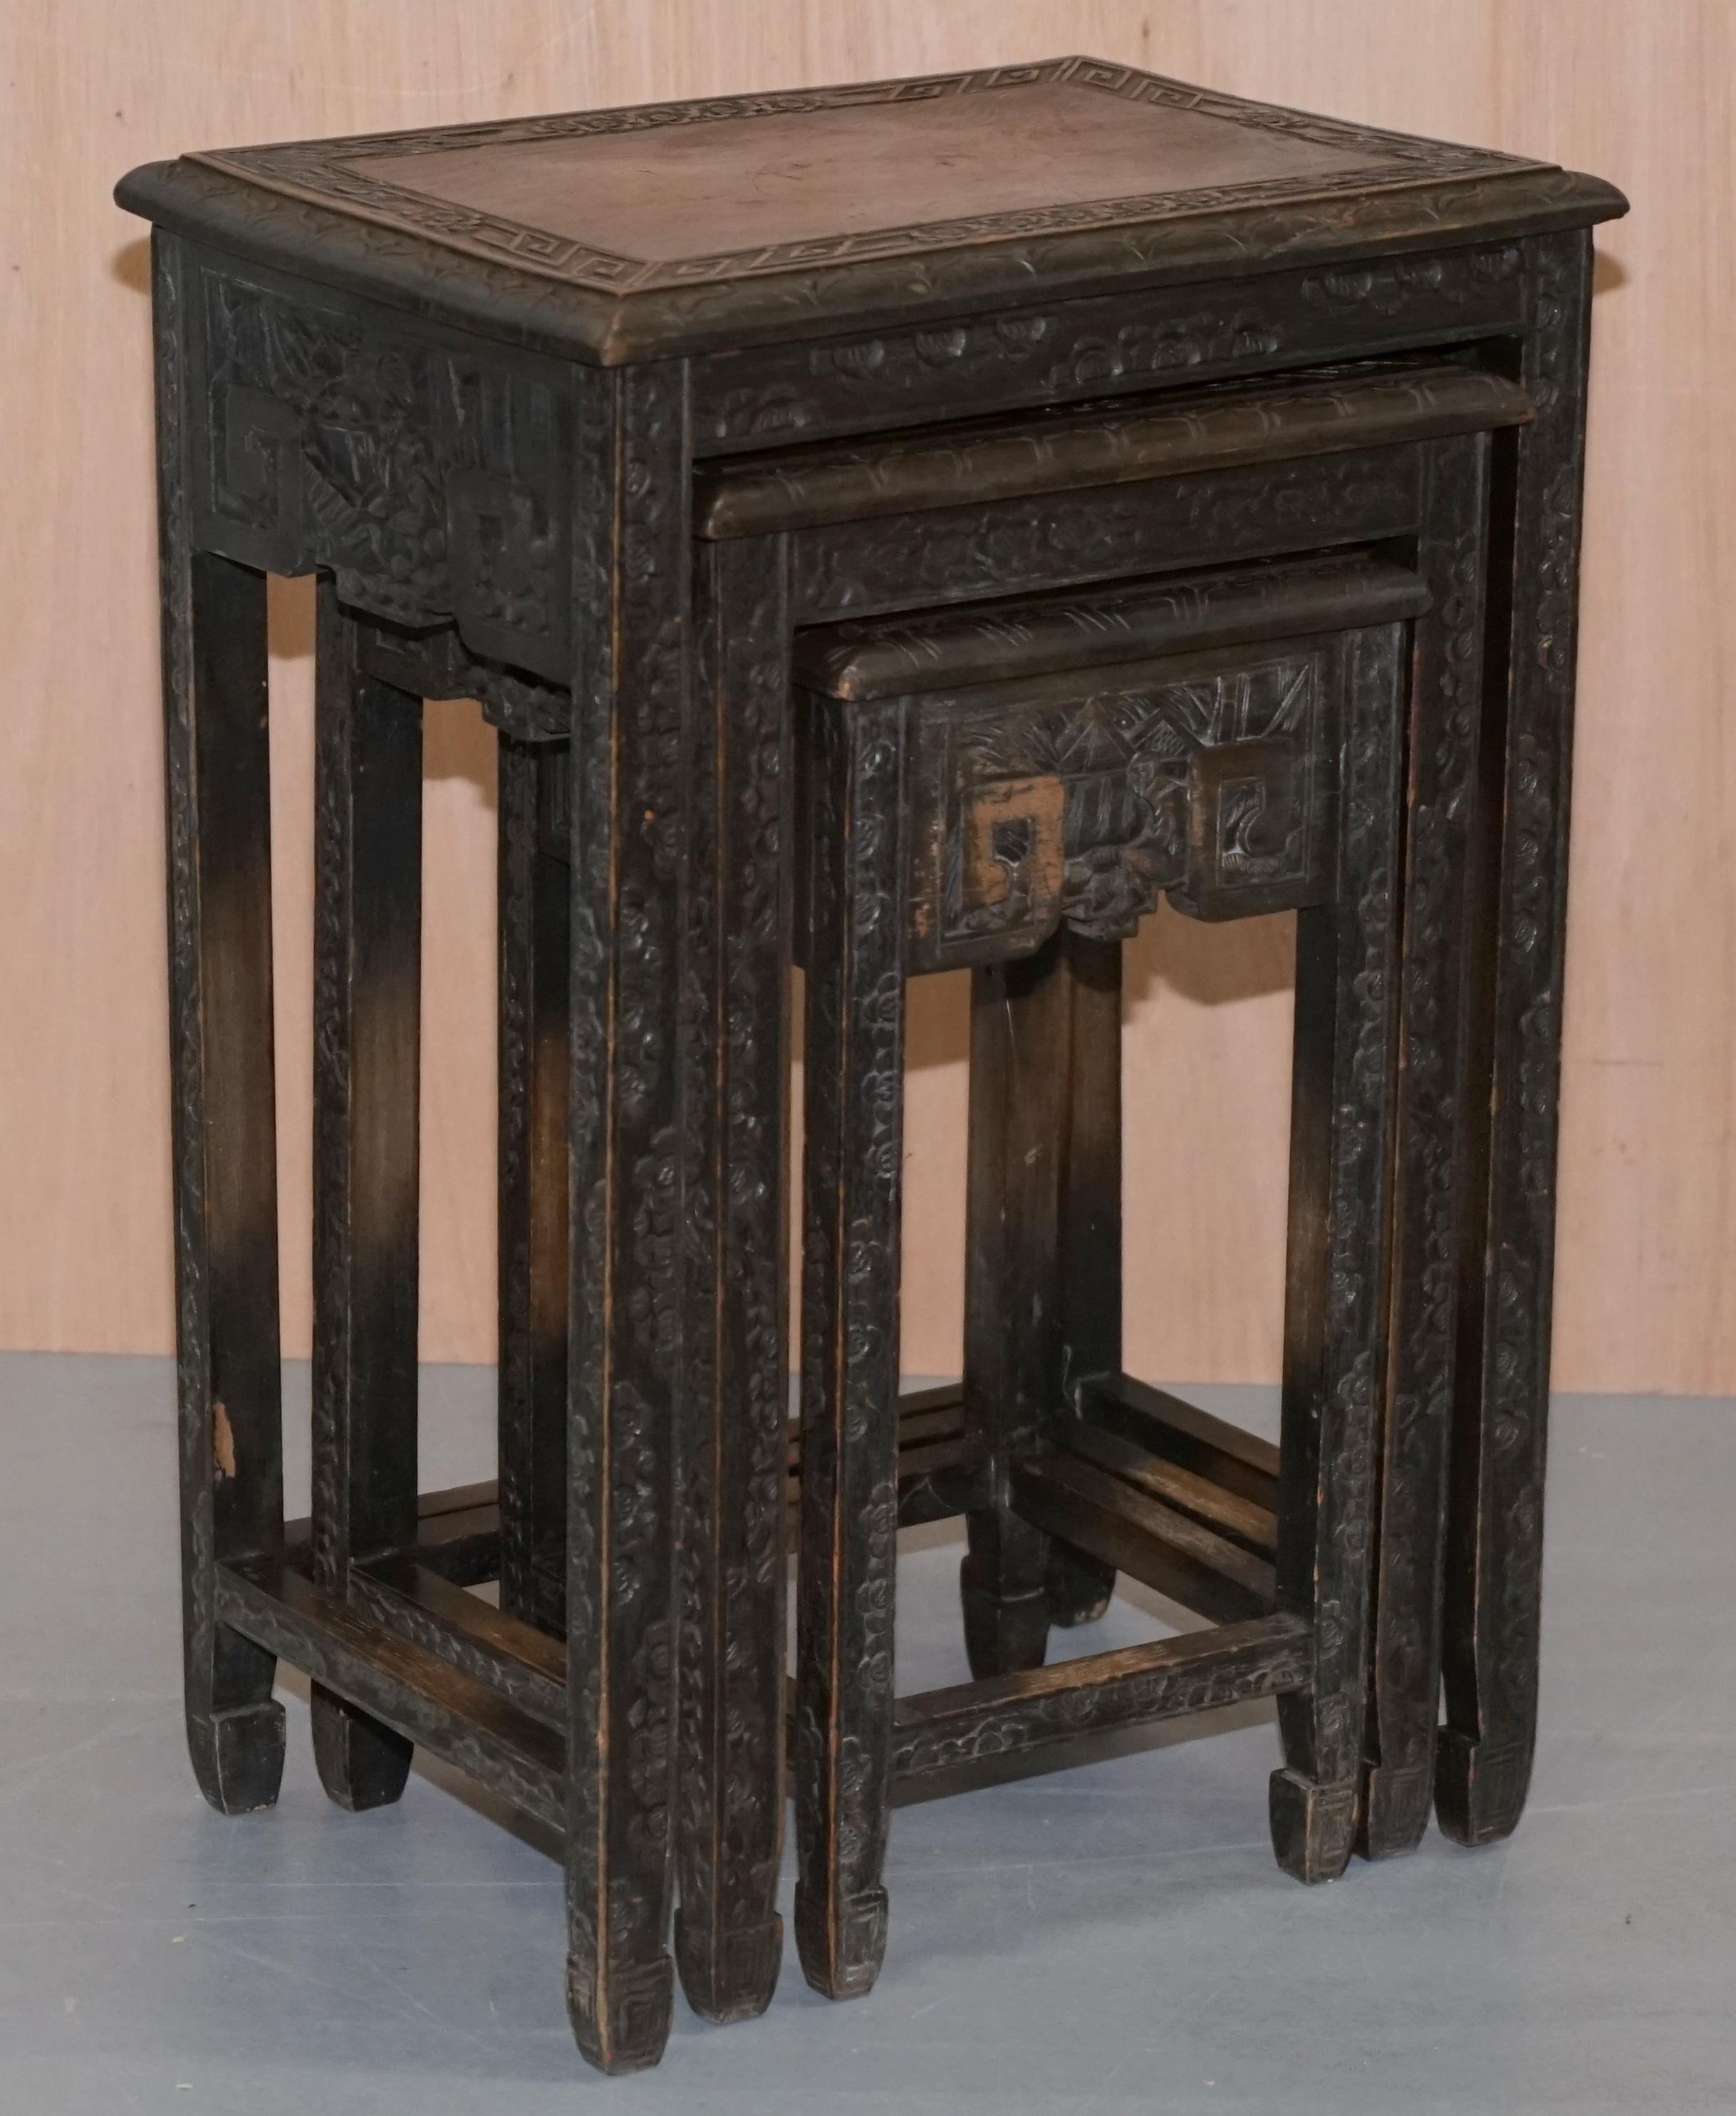 we are delighted to offer for sale this lovely set of circa 1900 ebonized Chinese Export nested tables all heavily carved

A very good looking suite, these are heavily carved with rural scenes, floral detailing and Aztec type lines all-over, the